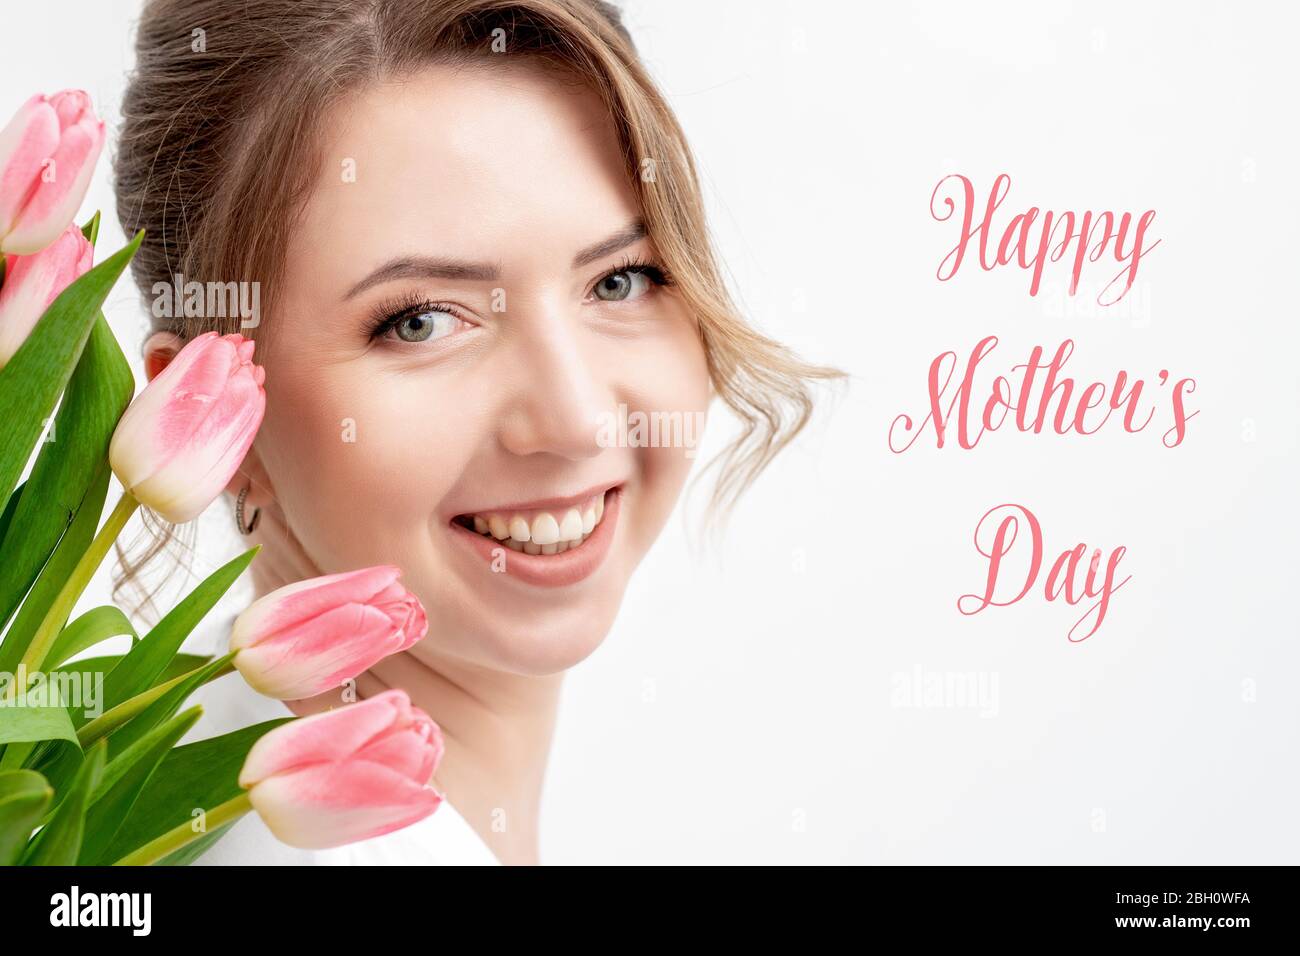 Happy Mother's Day pink text and portrait of young woman with pink ...